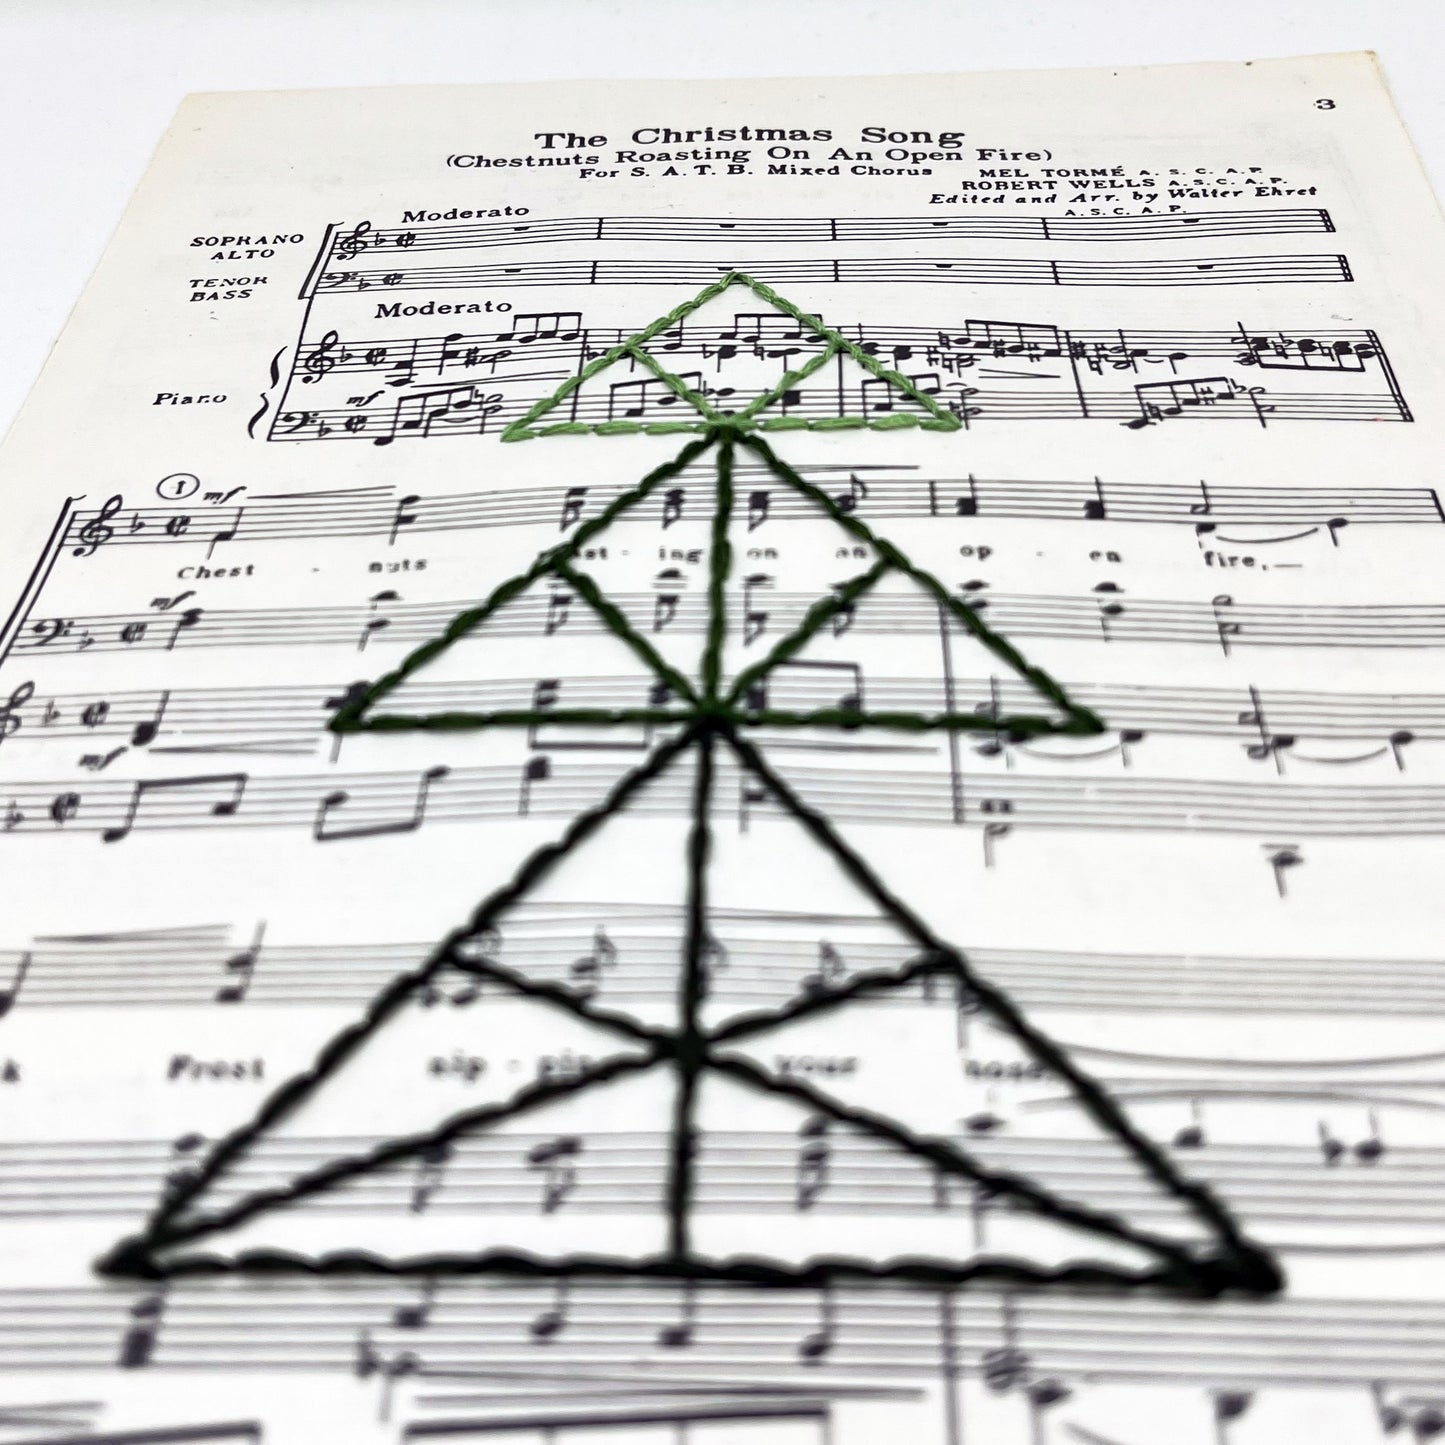 a close up angled view of sheet music from "The Christmas Song", hand stitched over with a Christmas tree made from triangles, in shades of green thread